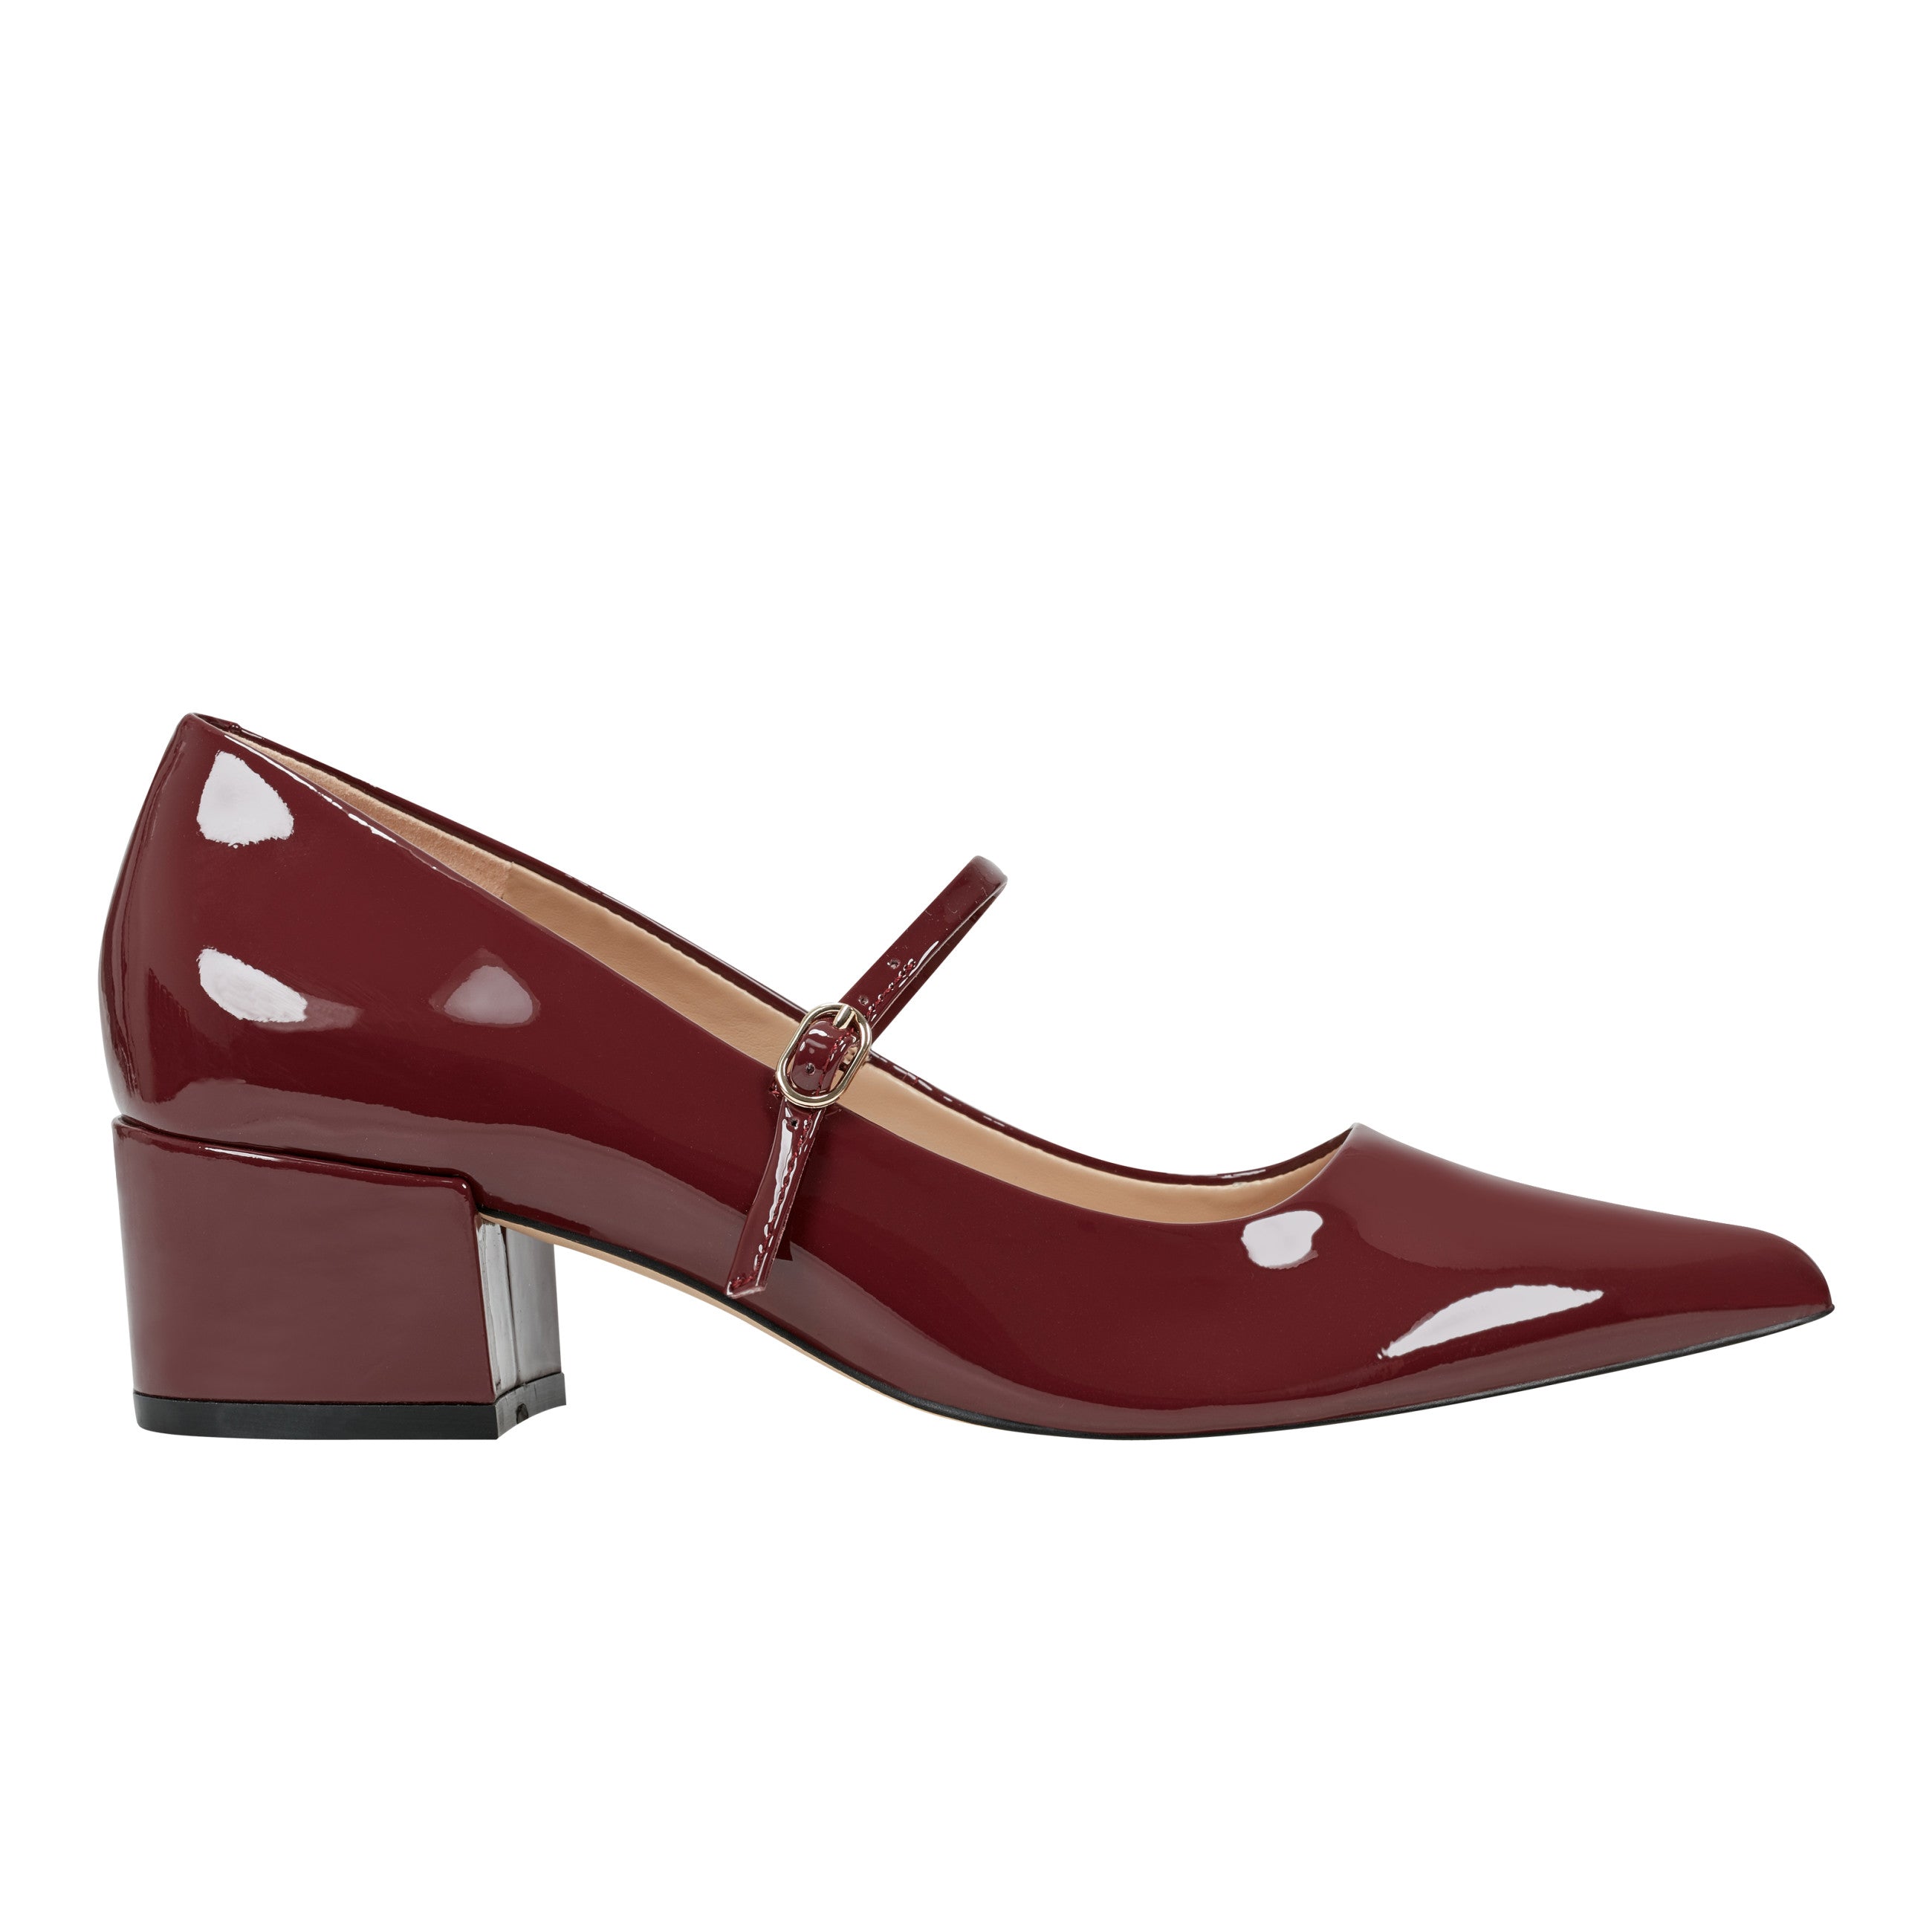 Luccie Mary Jane Pump